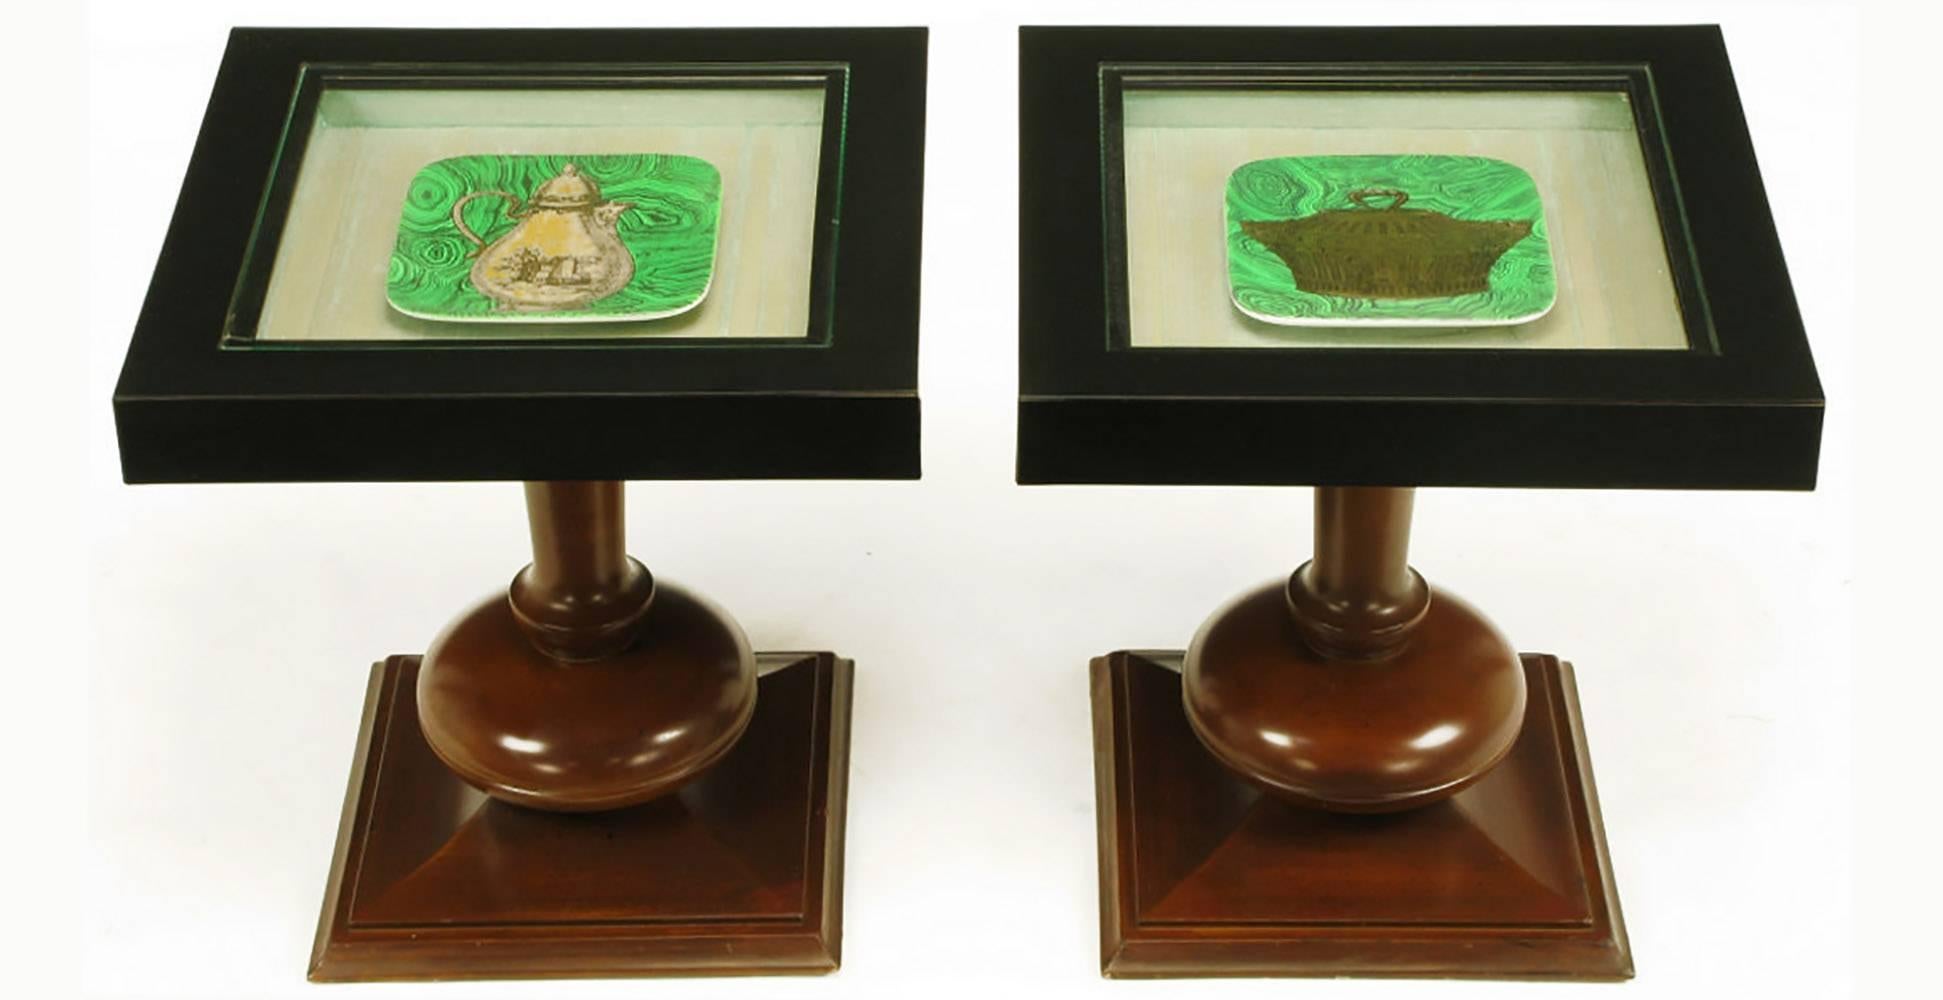 Pair of walnut and Micarta cocktail display tables with Piero Fornasetti malachite and gold square plates. Each plate is beneath a glass top and mounted on a silk lined recessed surface.